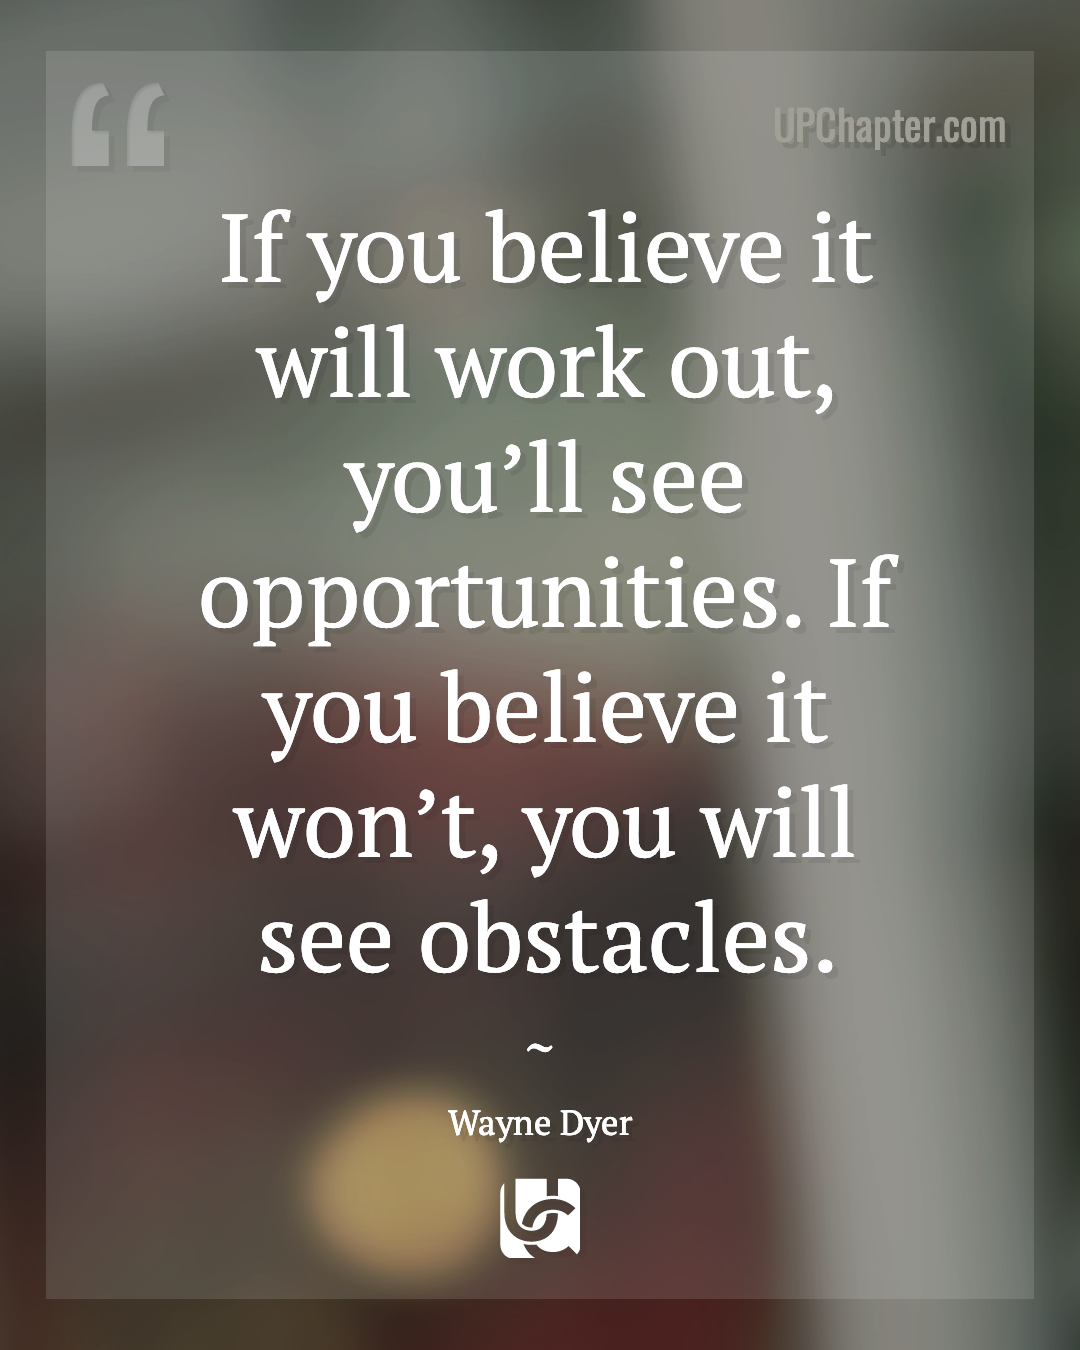 If you believe it will work out, you'll see opportunities. If you